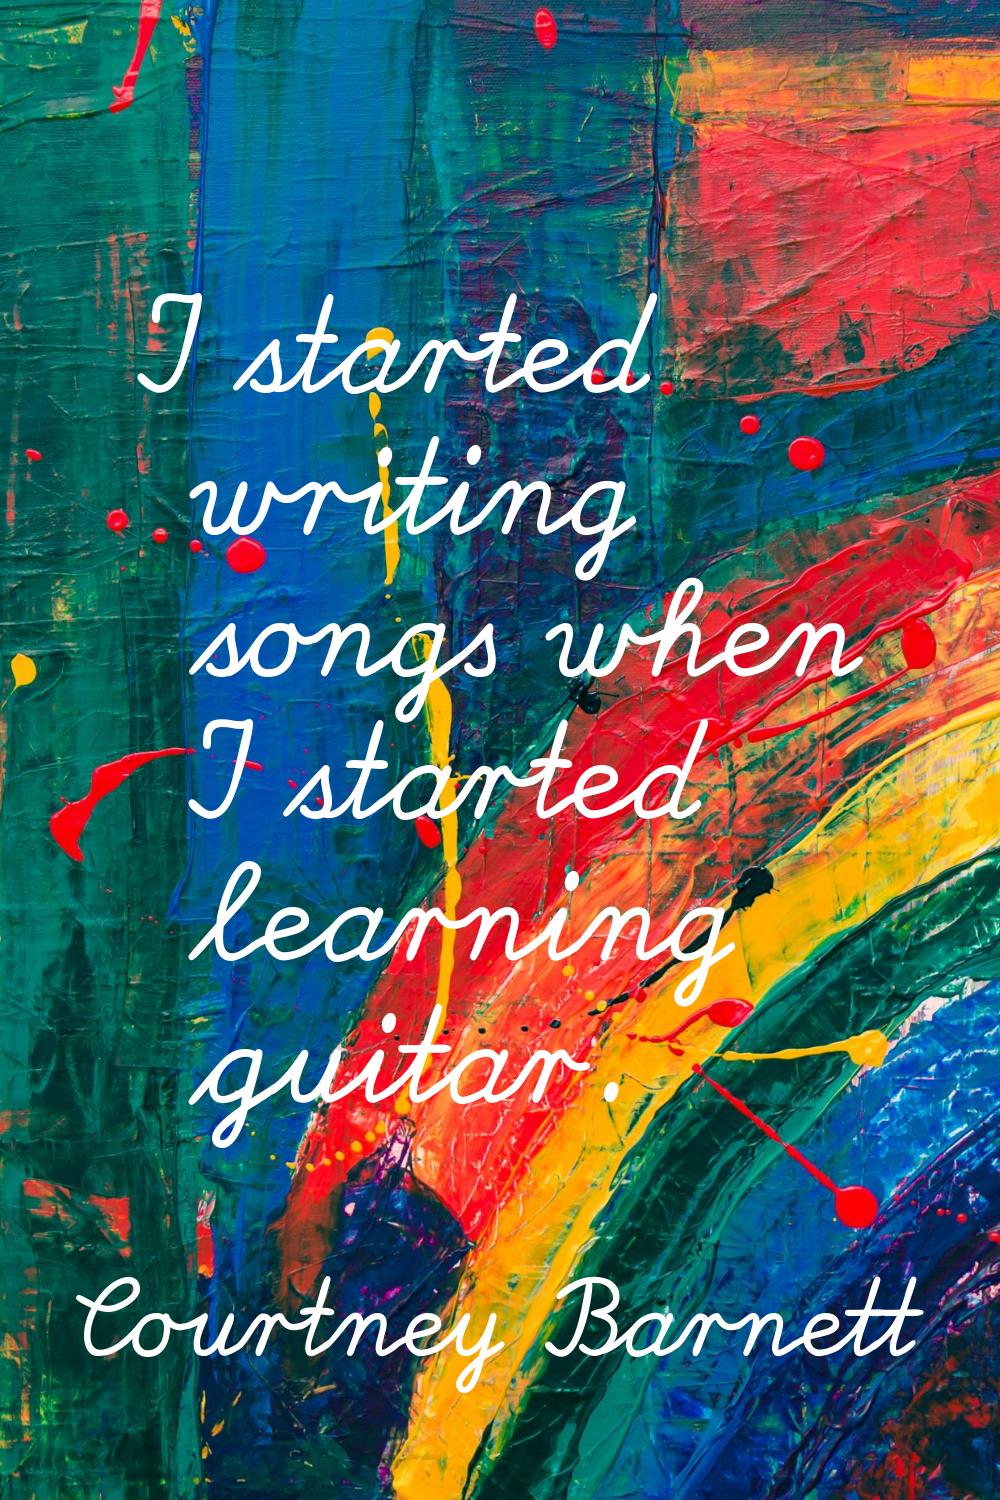 I started writing songs when I started learning guitar.